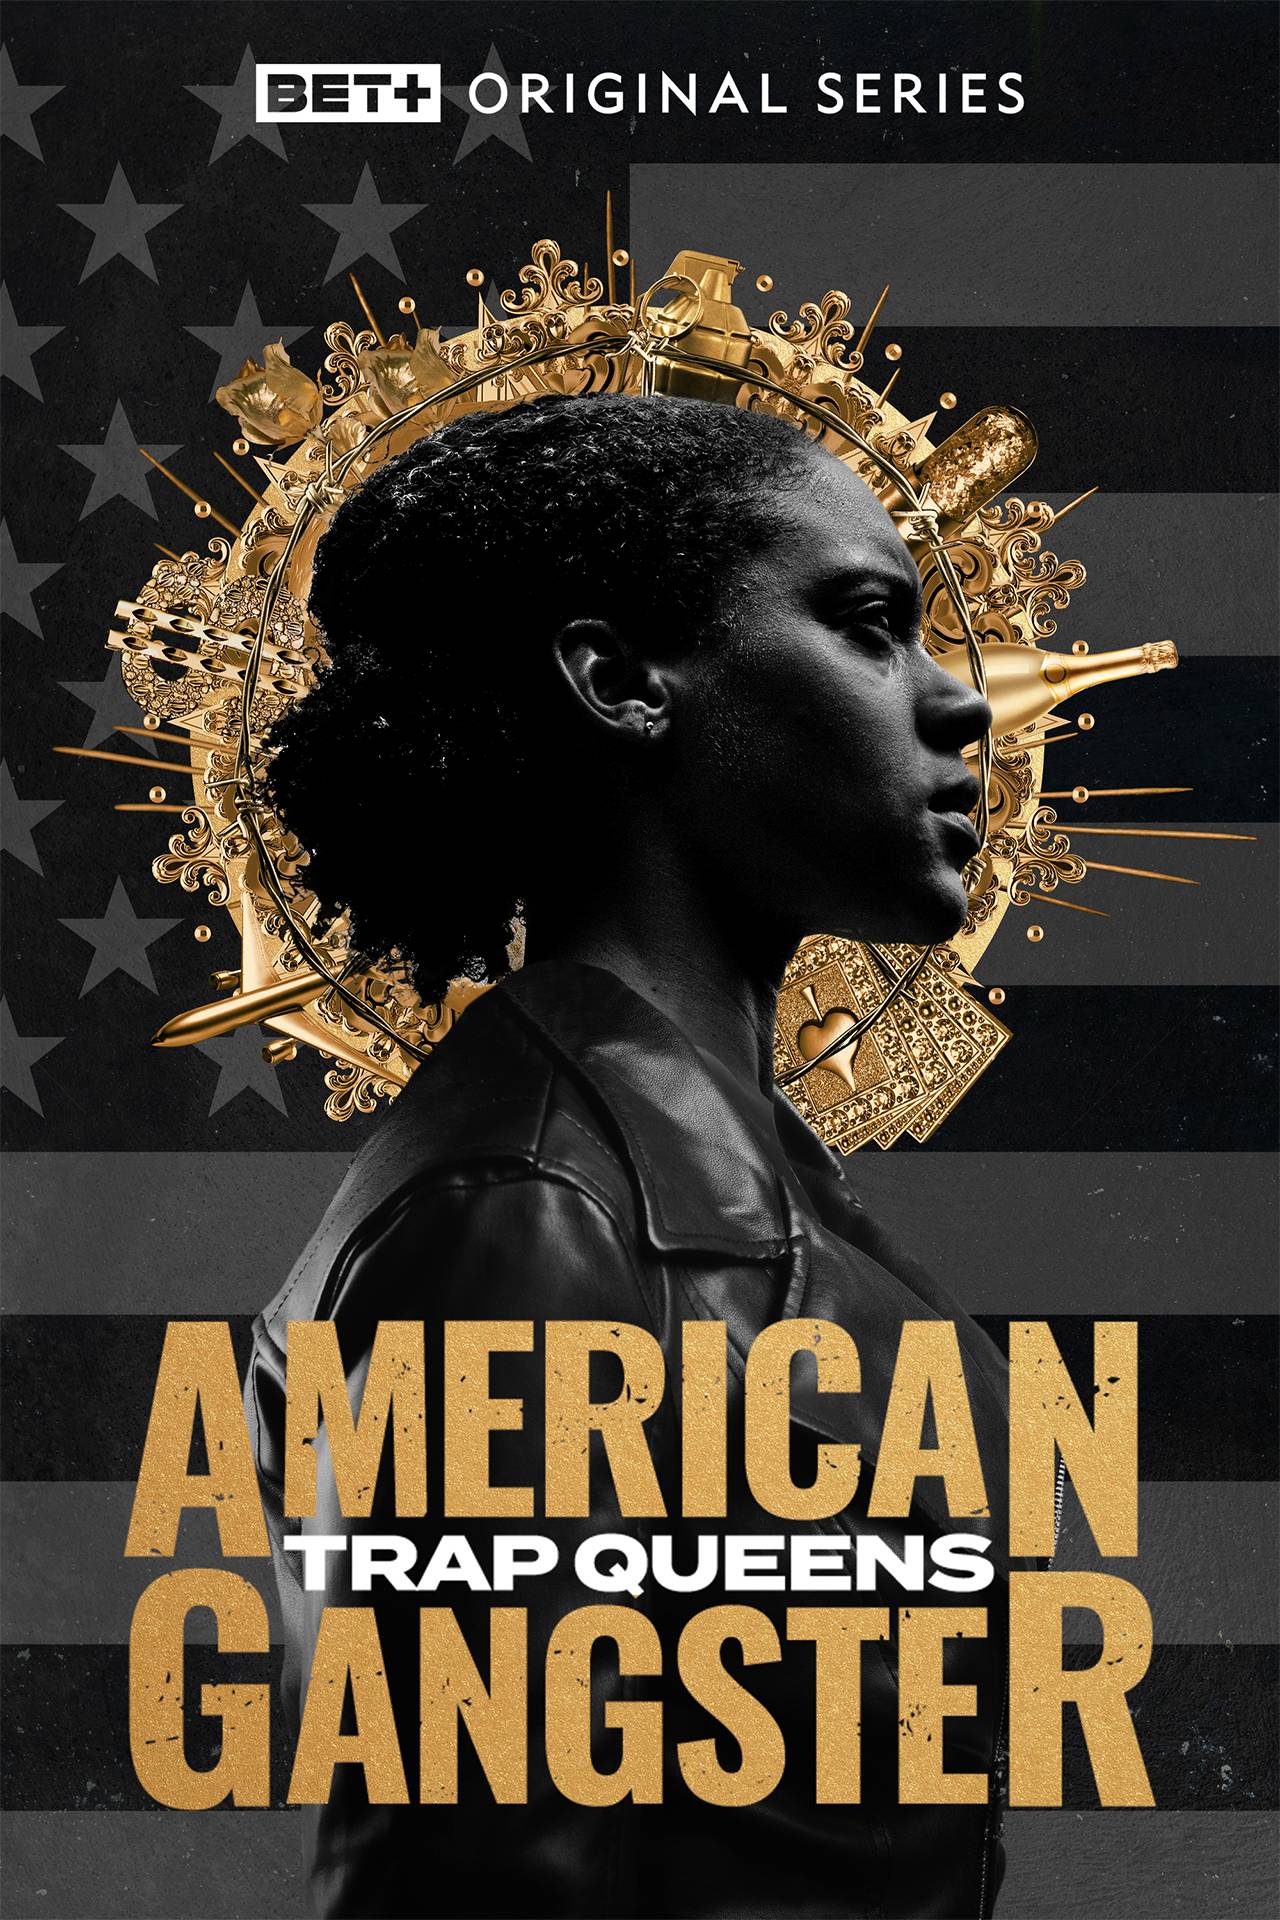 TV ratings for American Gangster: Trap Queens in Portugal. bet+ TV series